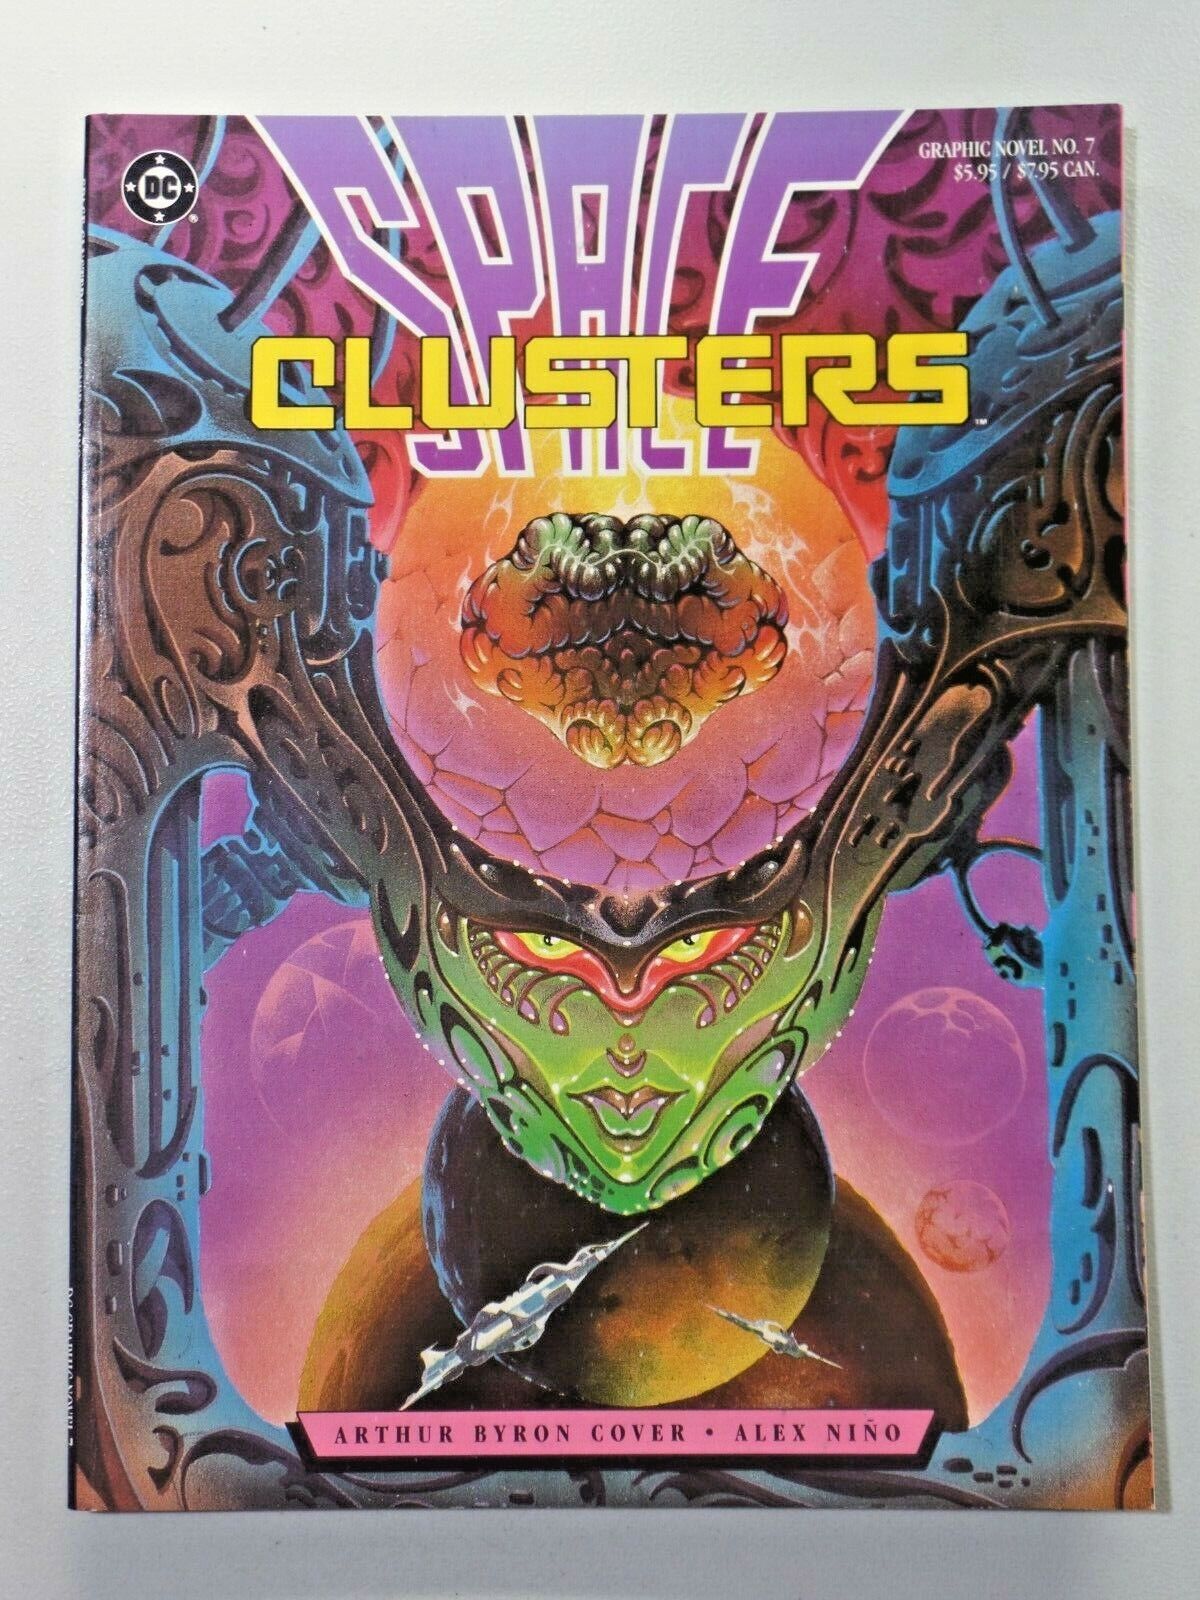 SPACE CLUSTERS by Arthur Byron Cover and Alex Nino DC Graphic Novel No. 7 9777